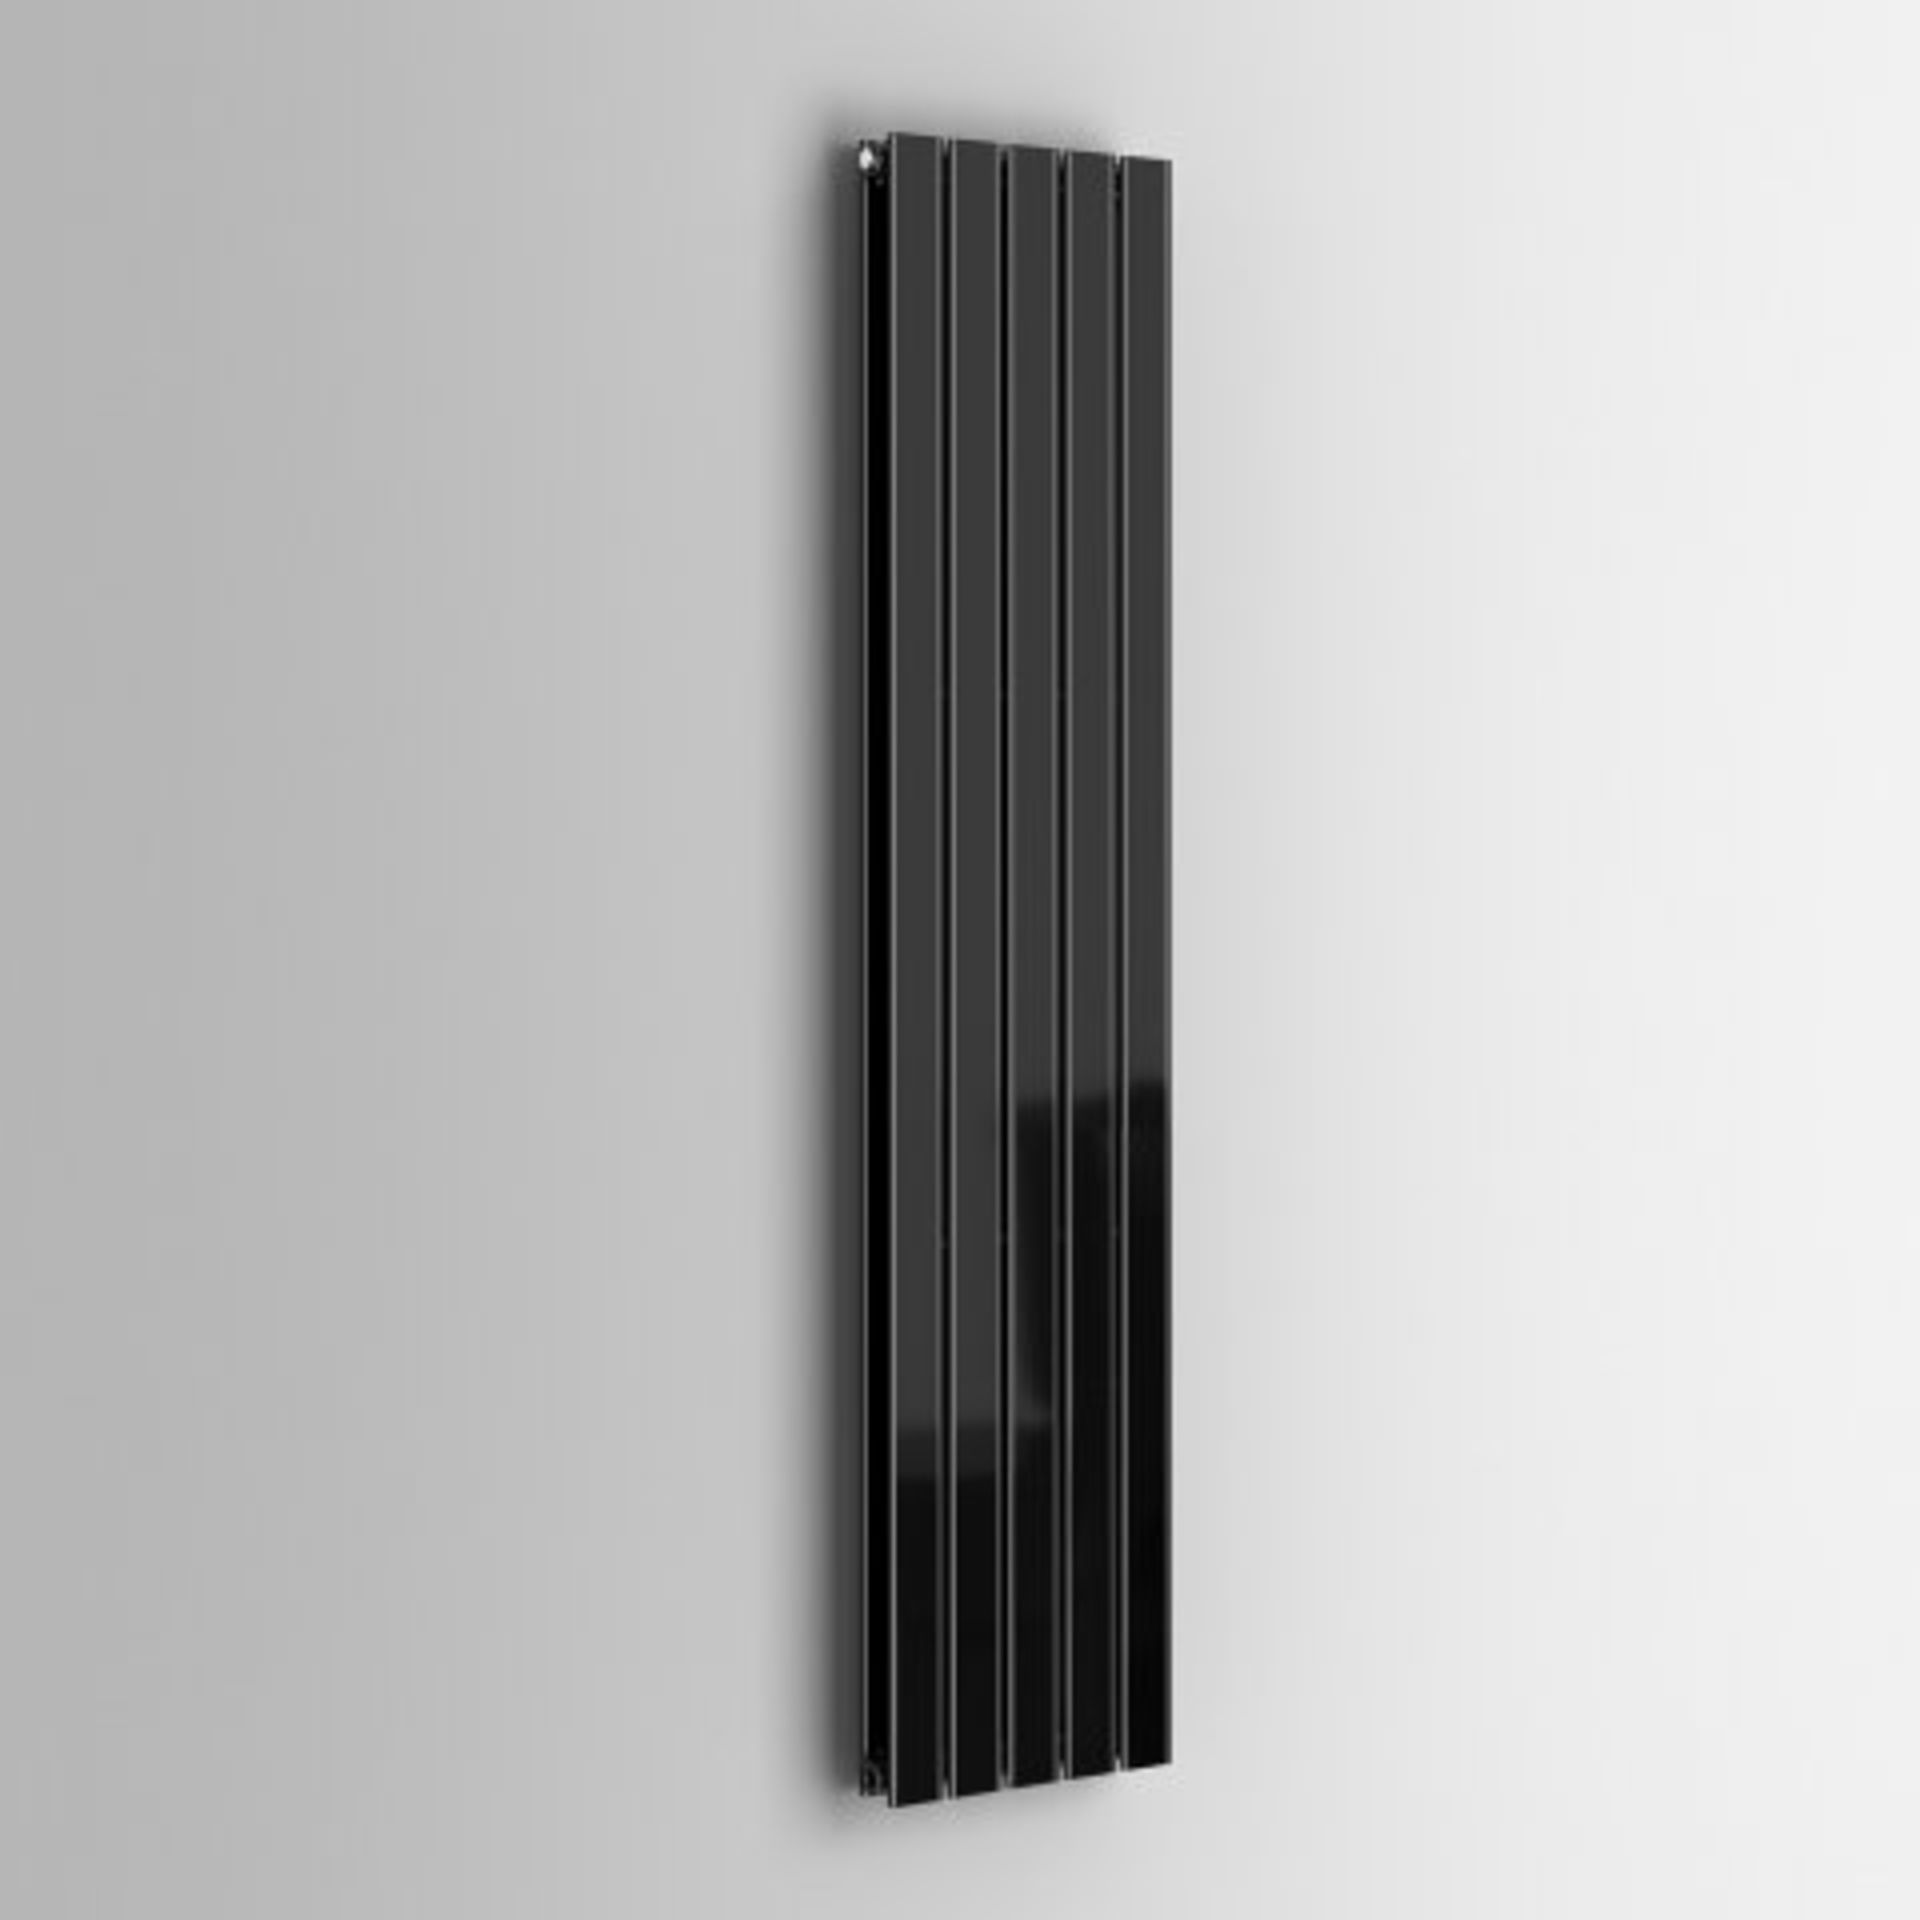 (P90) 1800x382mm Gloss Black Double Flat Panel Vertical Radiator. RRP £499.99. Our Thera Flat - Image 4 of 4